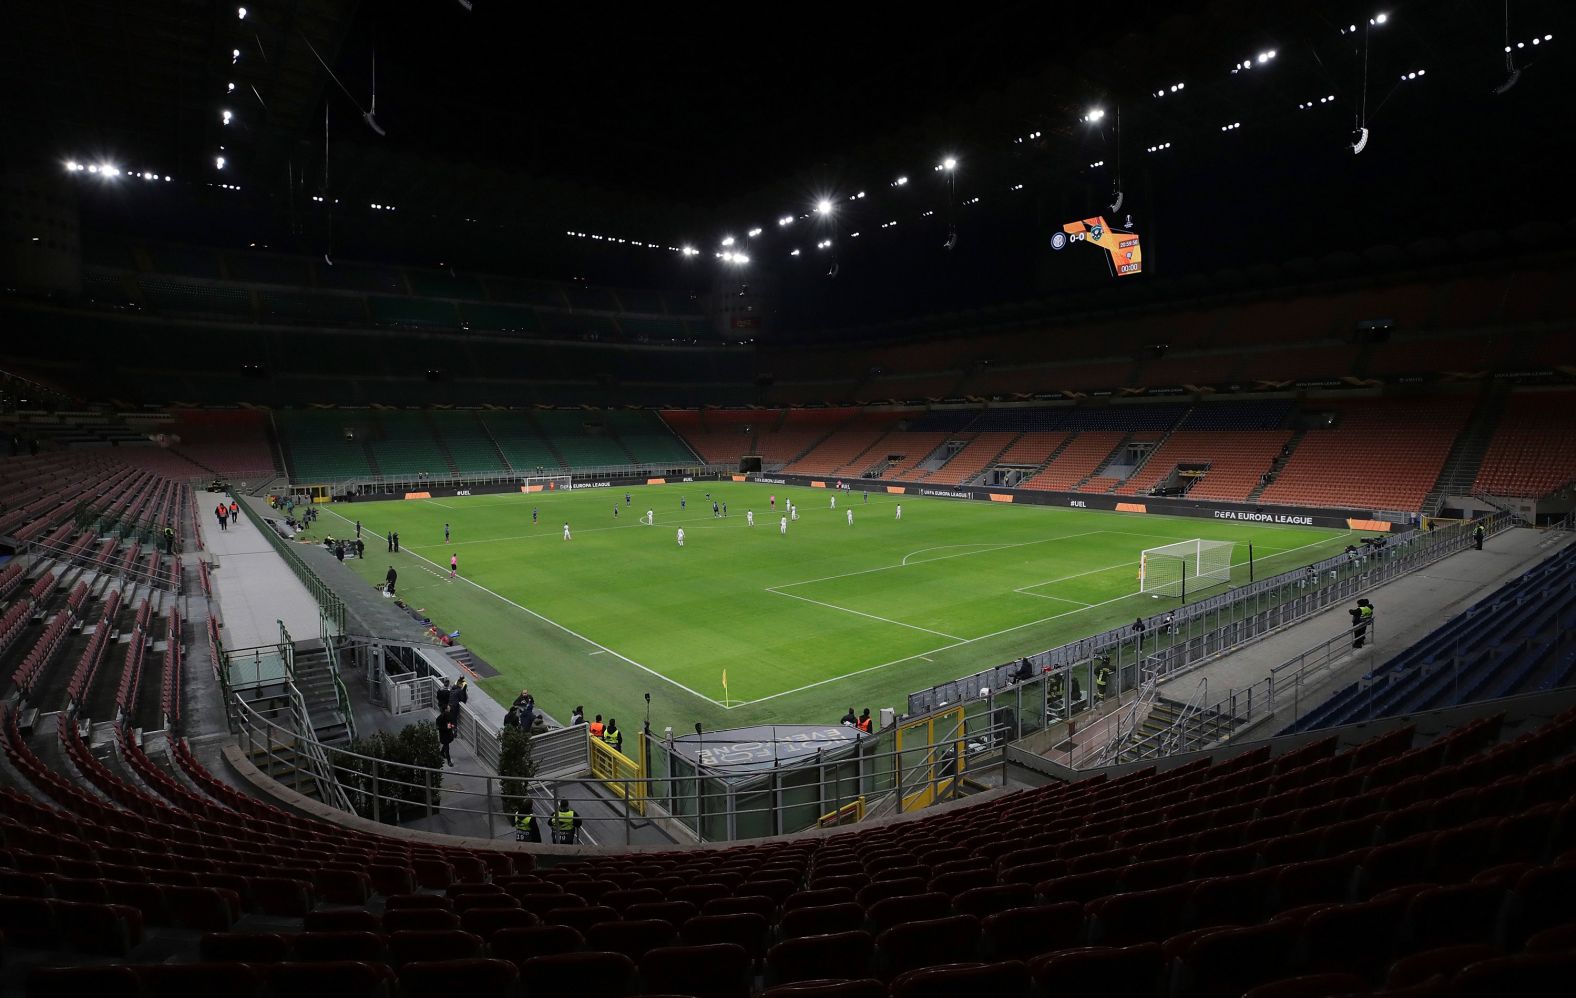 Inter Milan plays Ludogorets in an empty soccer stadium in Milan, Italy, on February 27, 2020. The match <a href="index.php?page=&url=https%3A%2F%2Fedition.cnn.com%2F2020%2F02%2F28%2Ffootball%2Finter-milan-coronavirus-ludogorets-football-spt-intl%2Findex.html" target="_blank">was ordered to be played behind closed doors</a> as Italian authorities continued to grapple with the coronavirus outbreak.